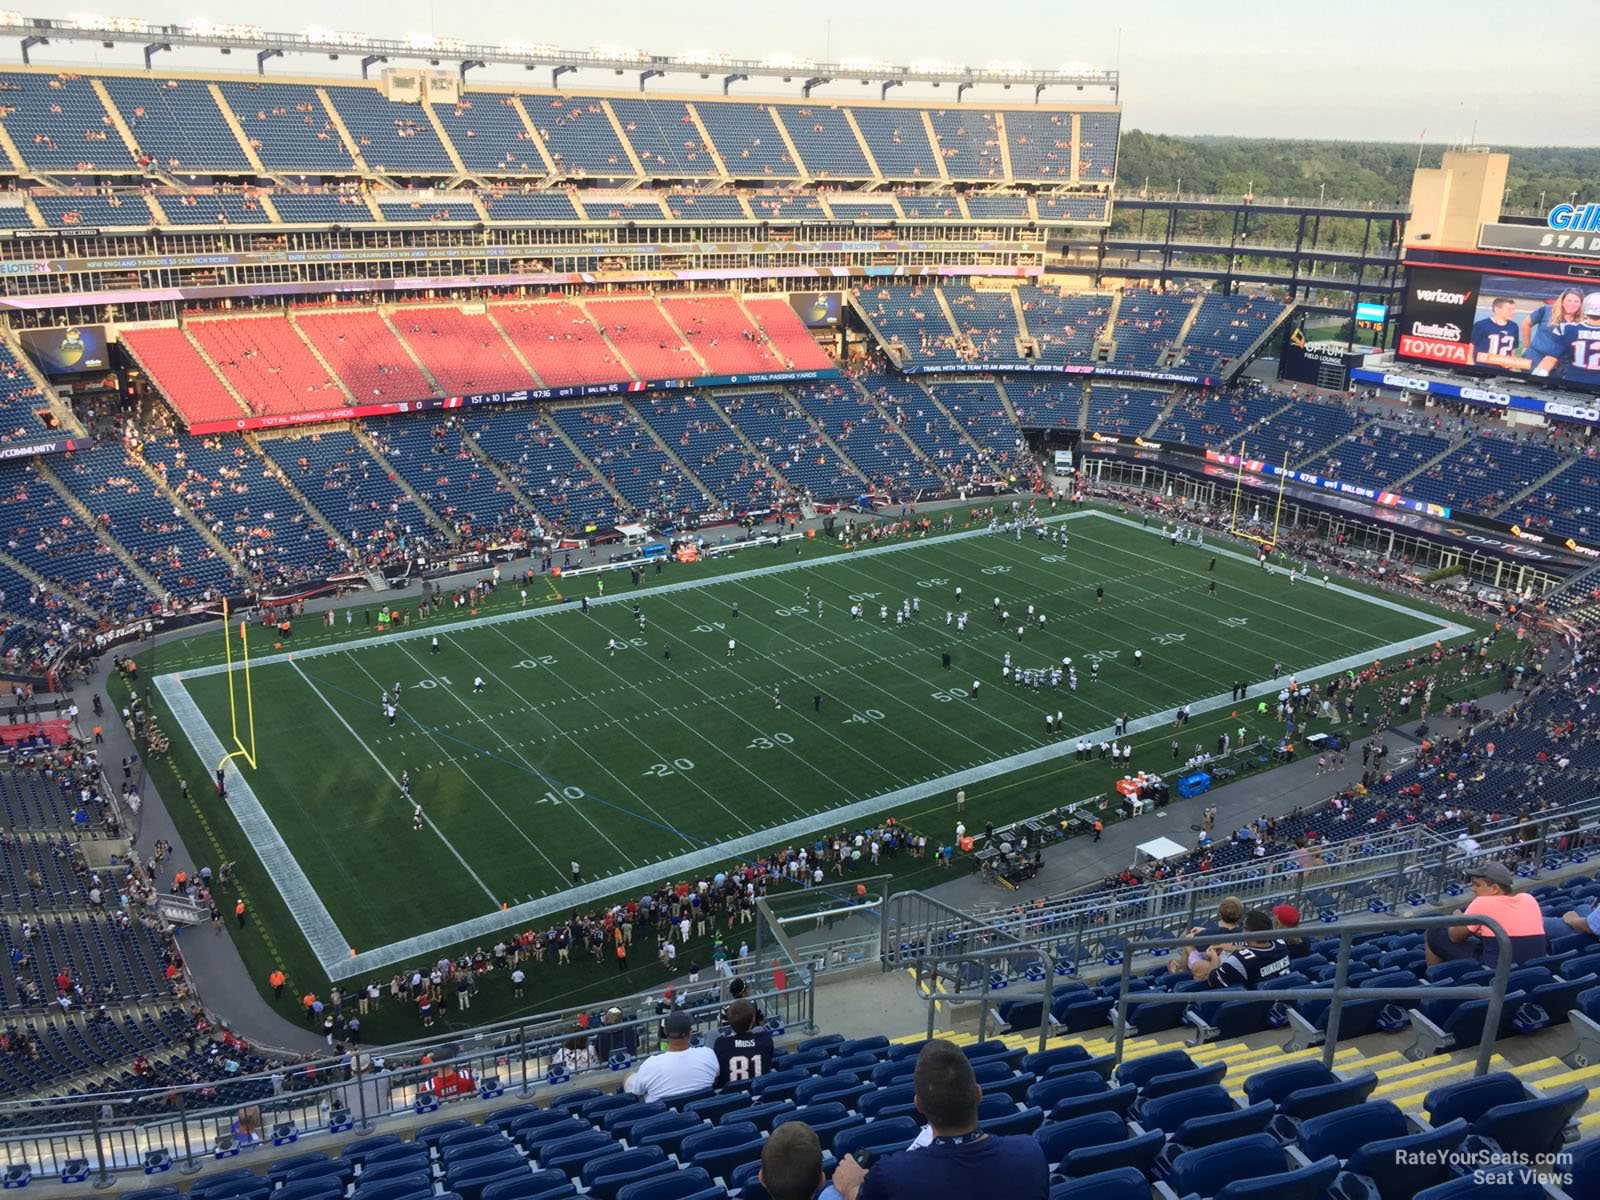 section 337, row 19 seat view  for football - gillette stadium